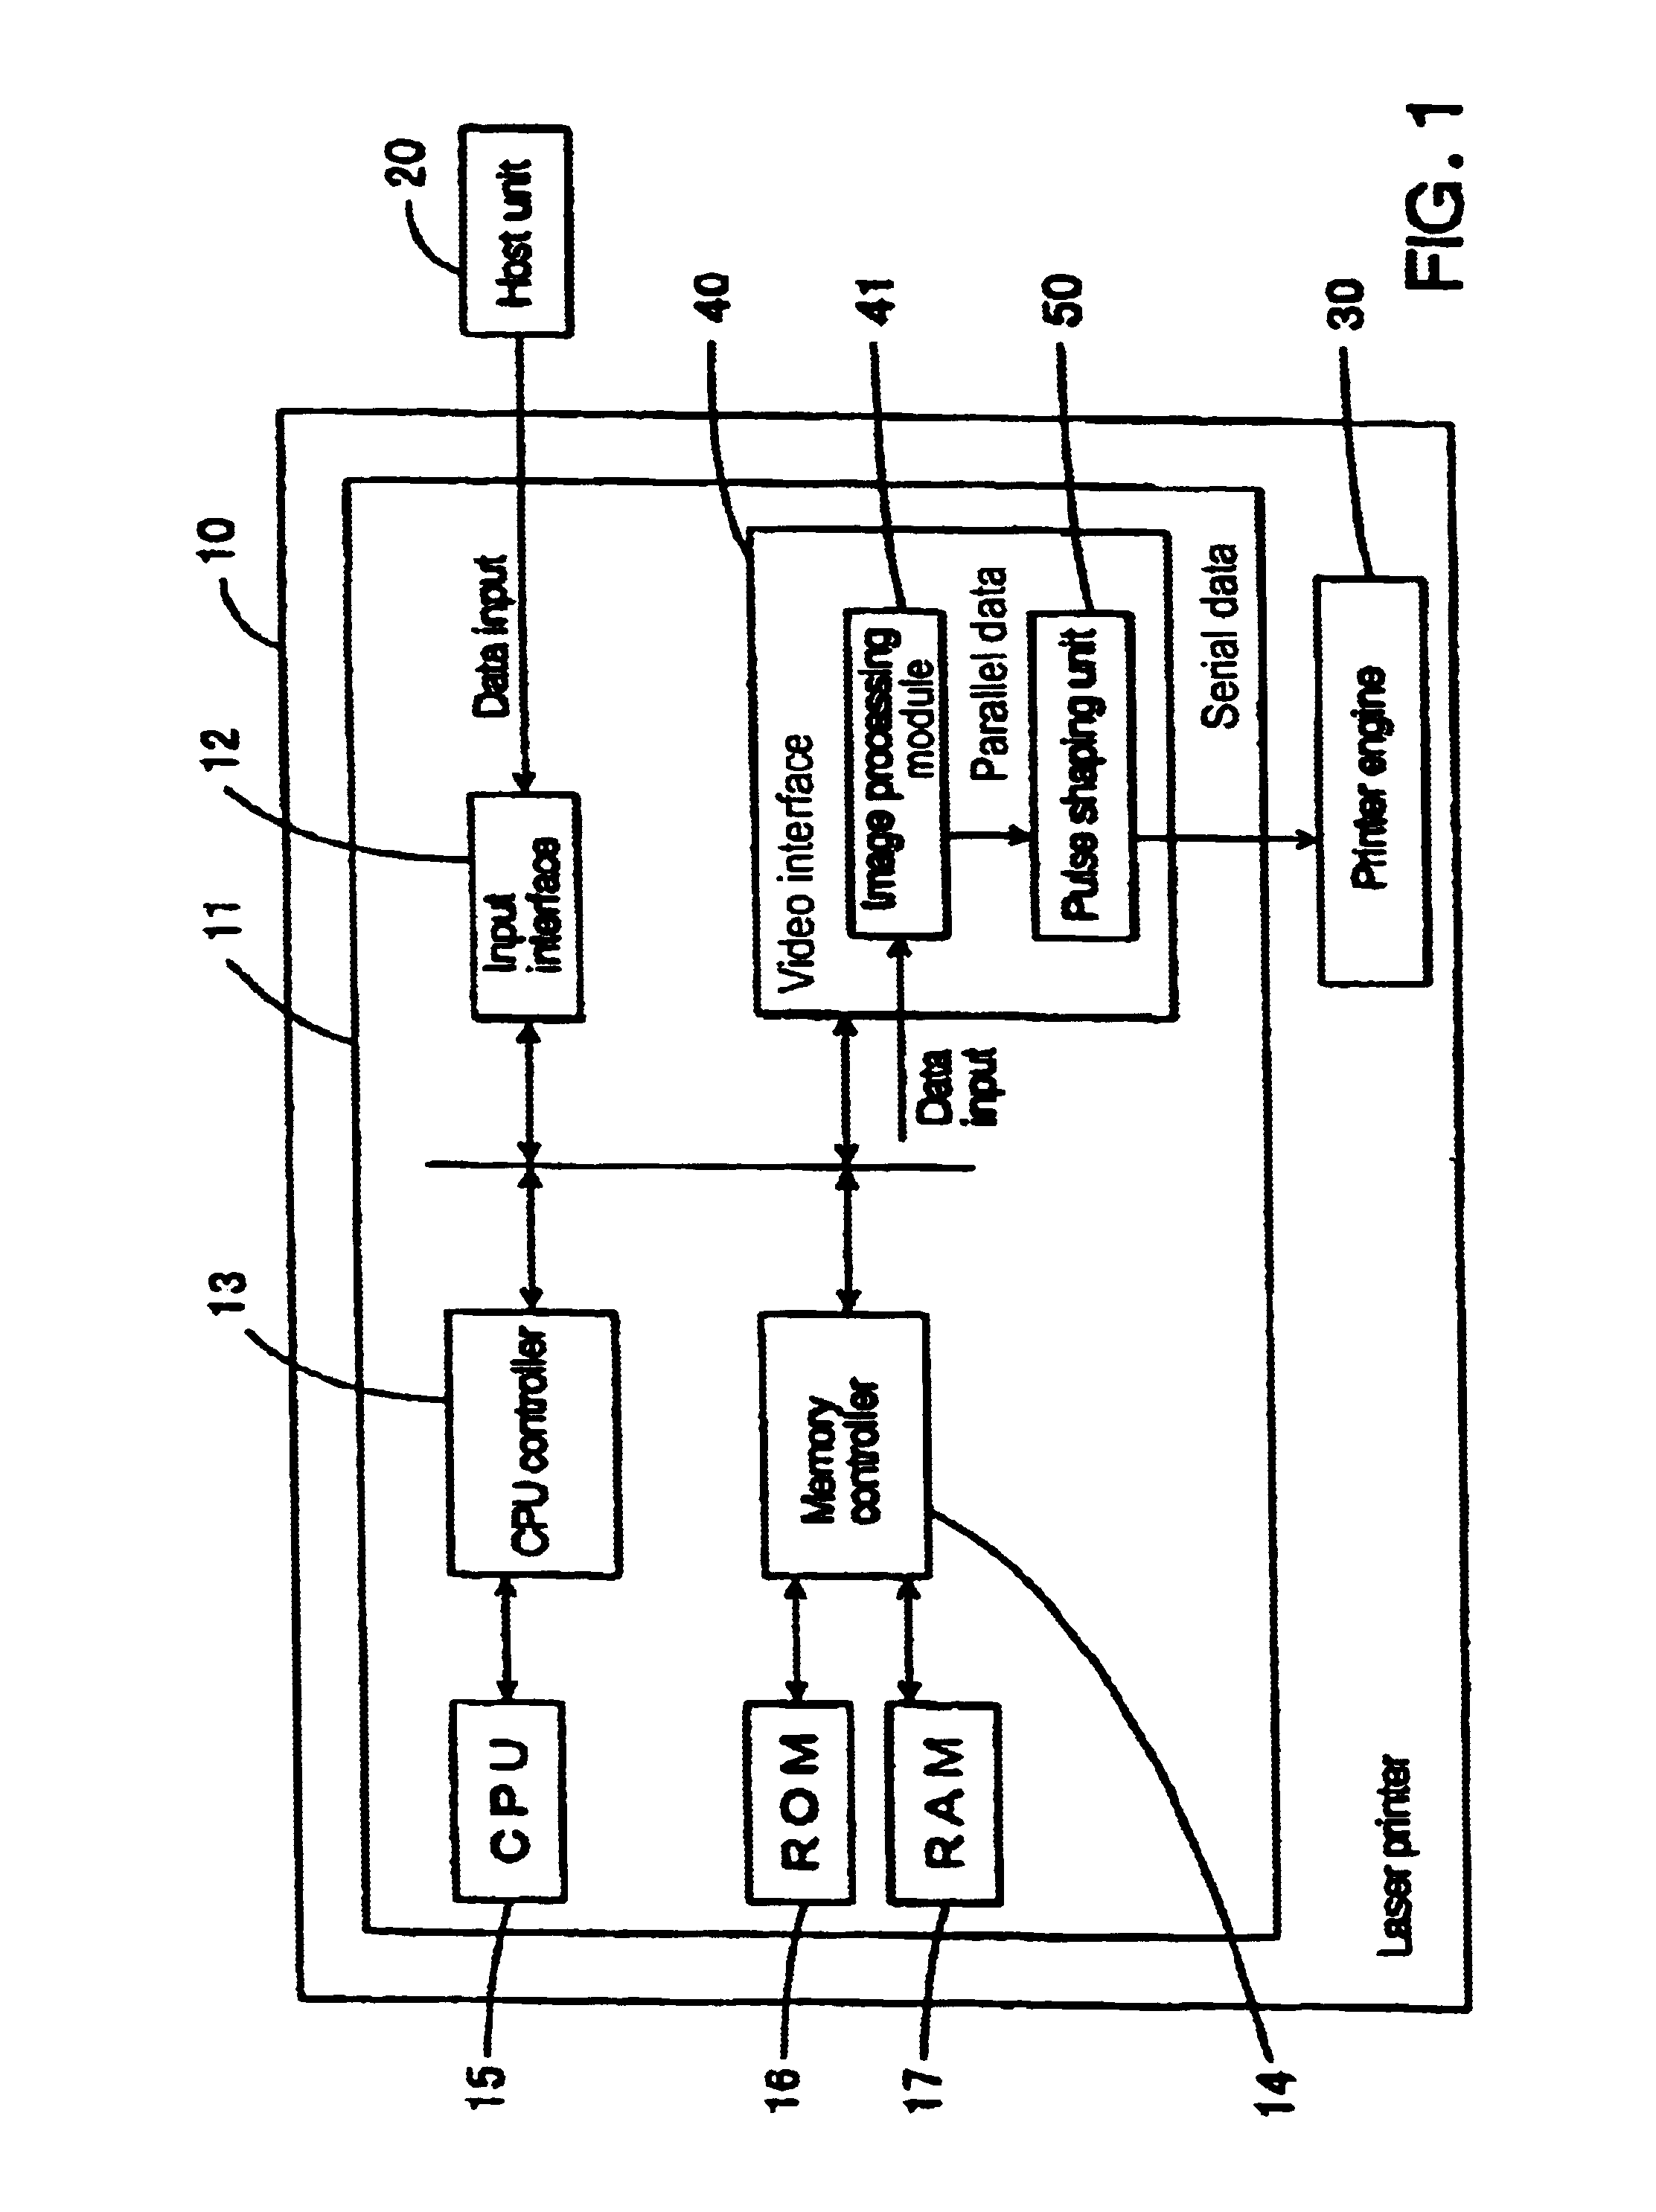 Pulse shaping system, laser printer, pulse shaping method and method of generating serial video data for laser printer